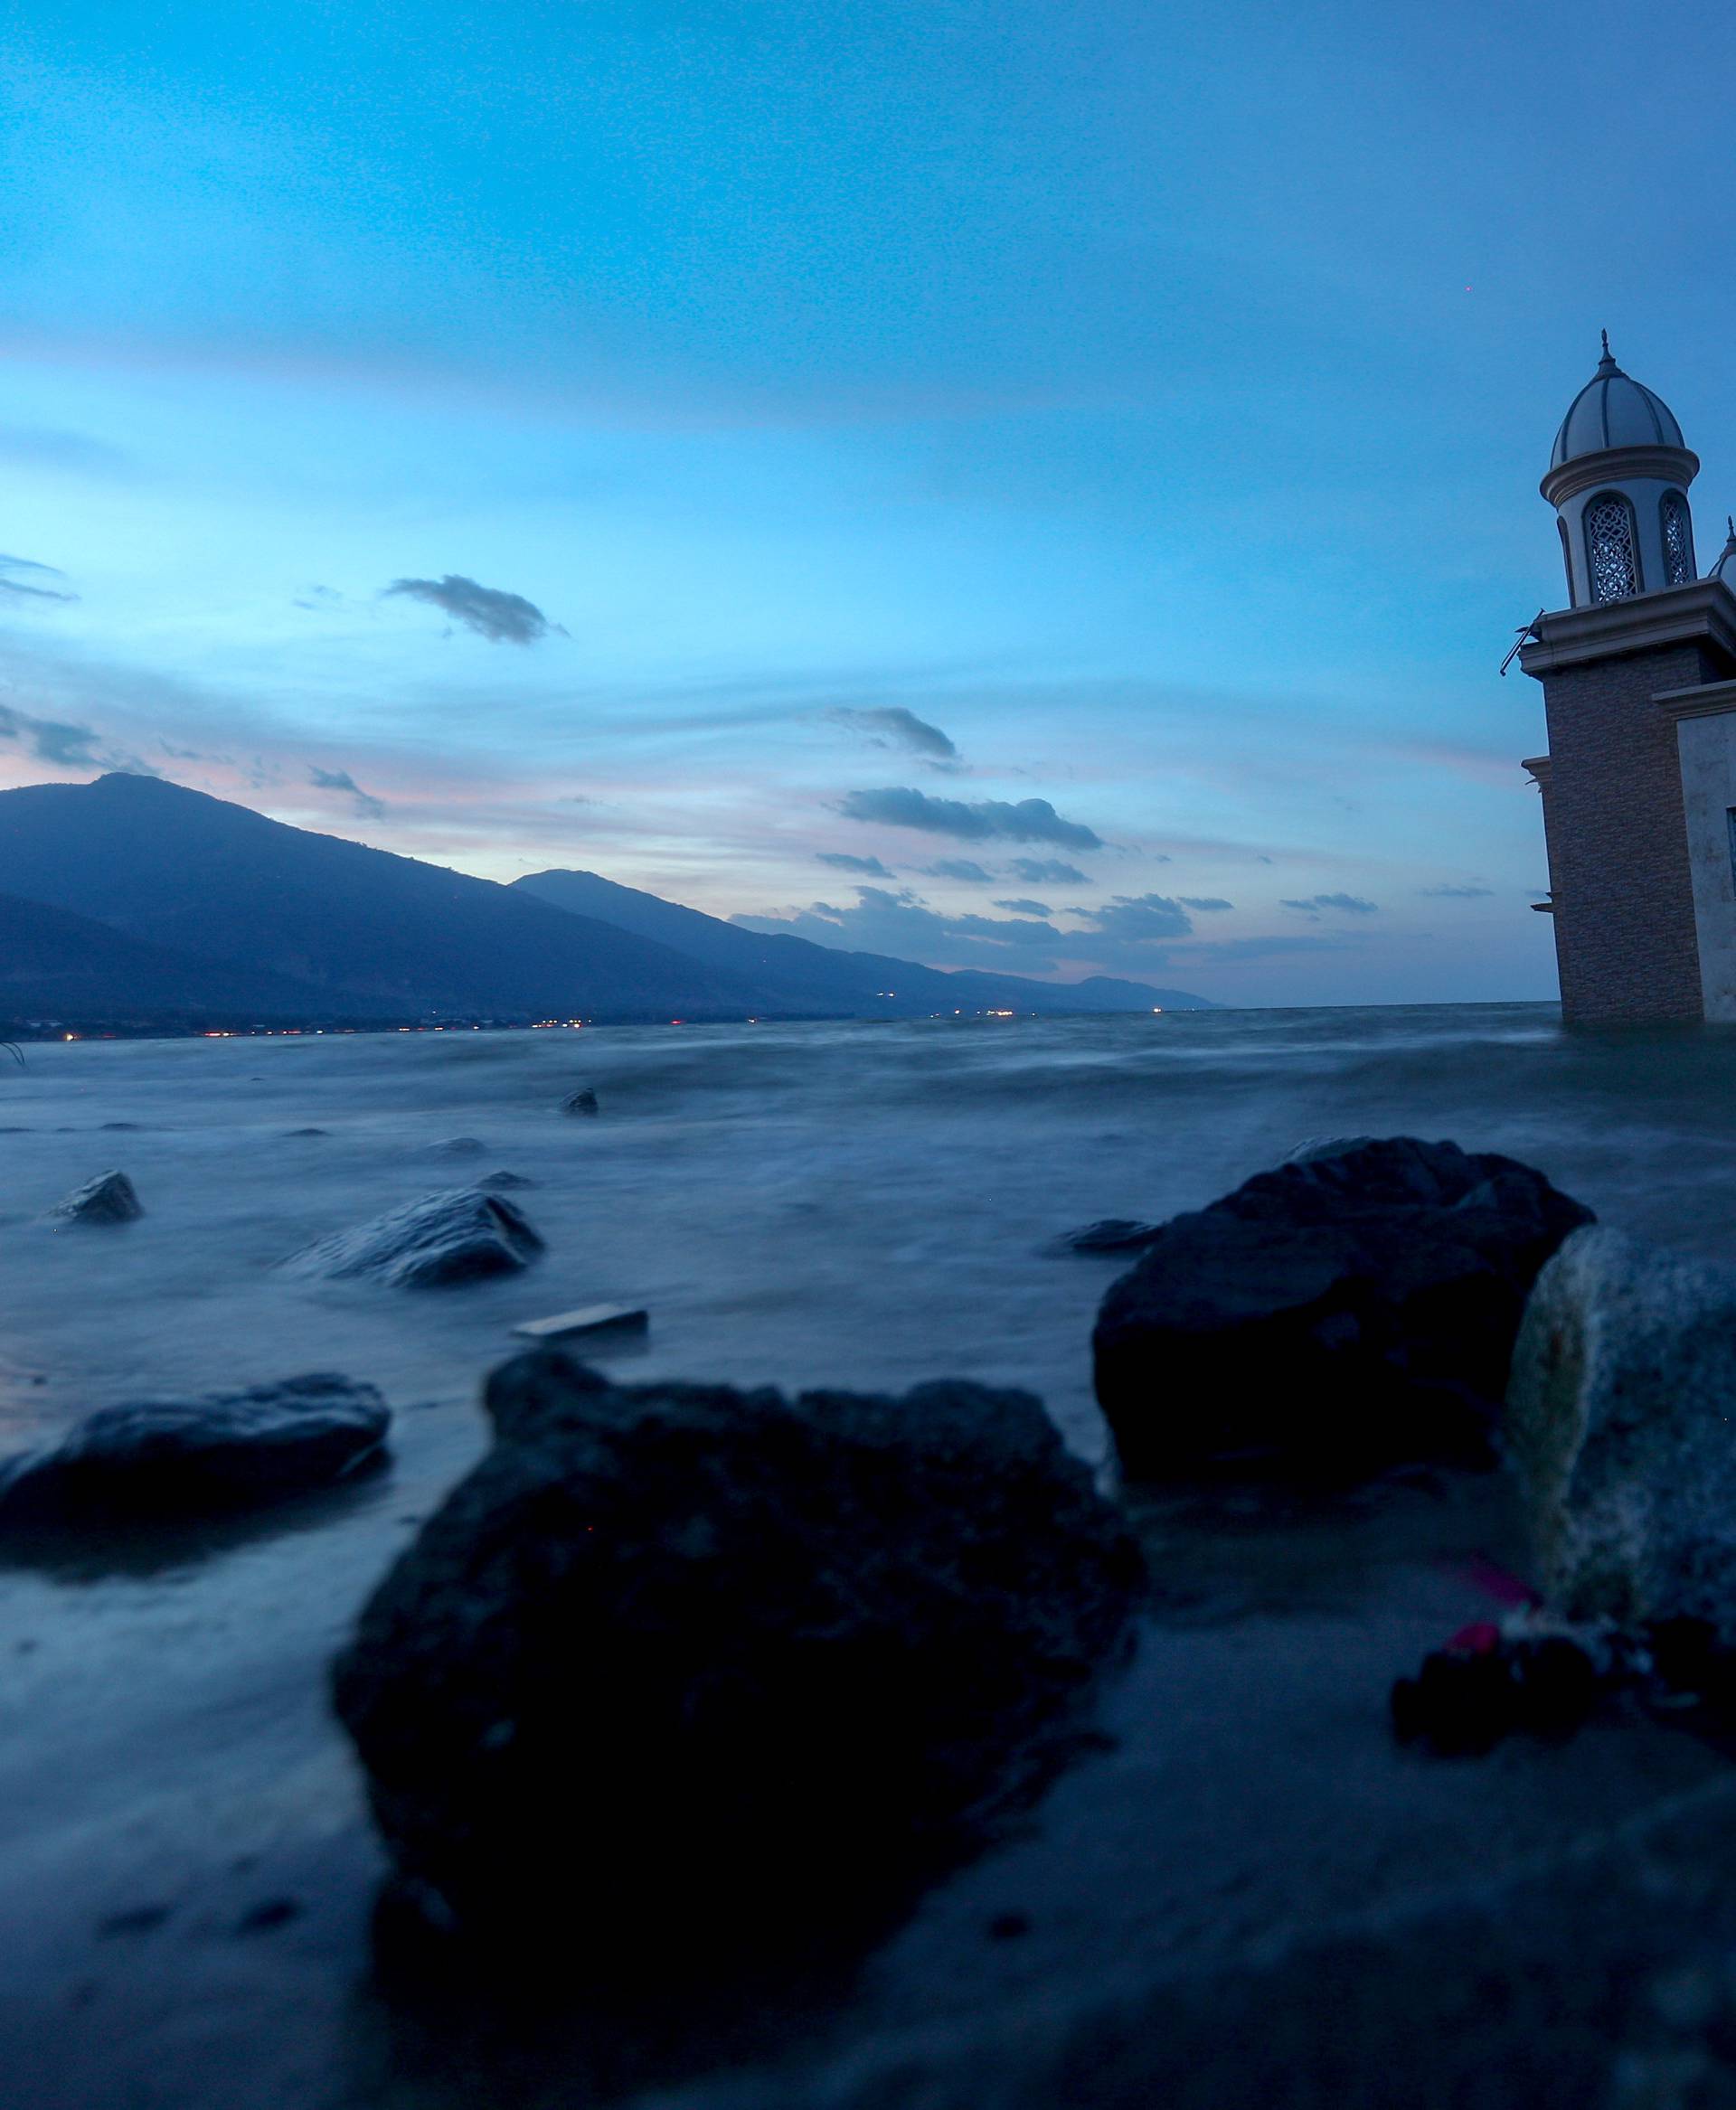 A remains of a mosque destroyed by the earthquake and tsunami is pictured in Palu, Central Sulawesi